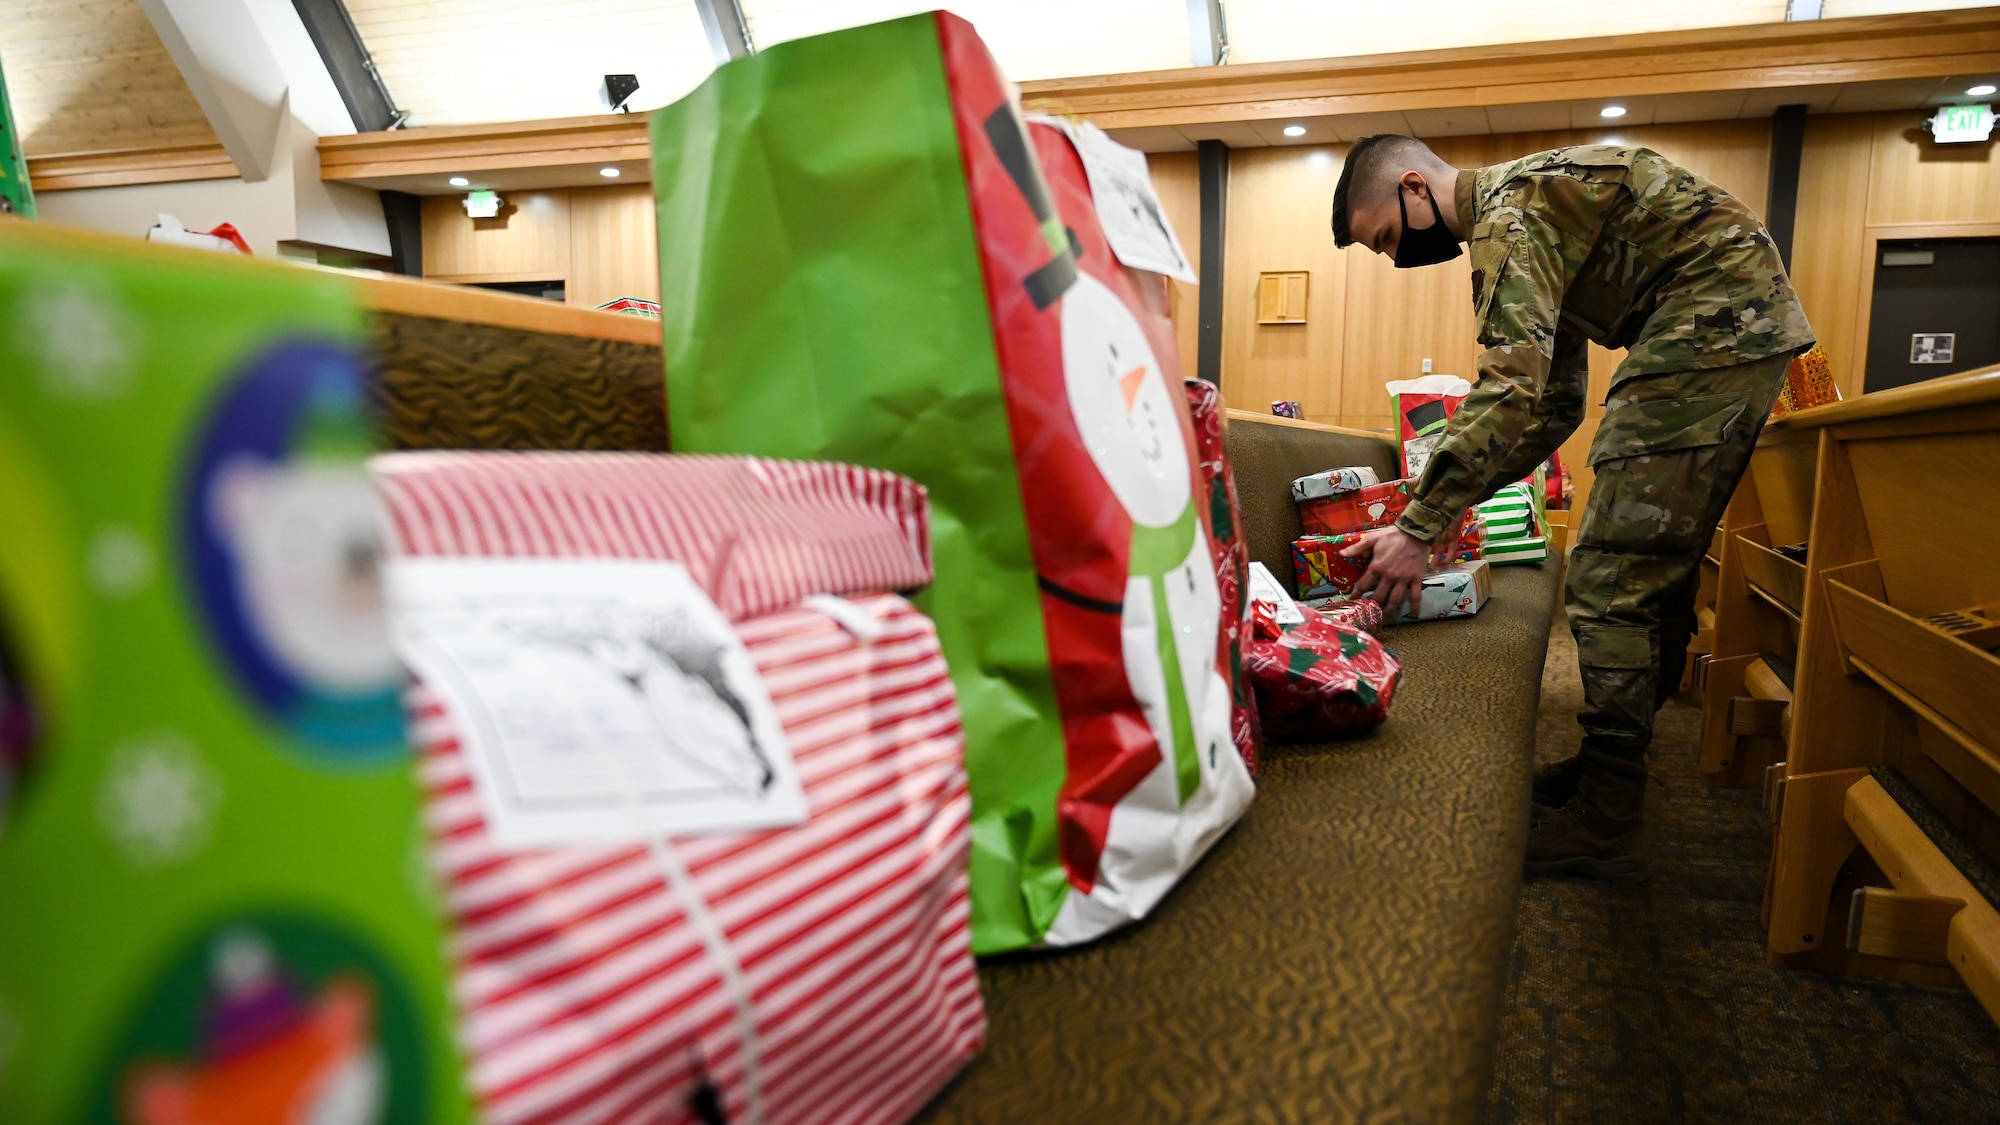 Volunteers sort Angel Tree wrapped gifts on pews inside the base chapel.